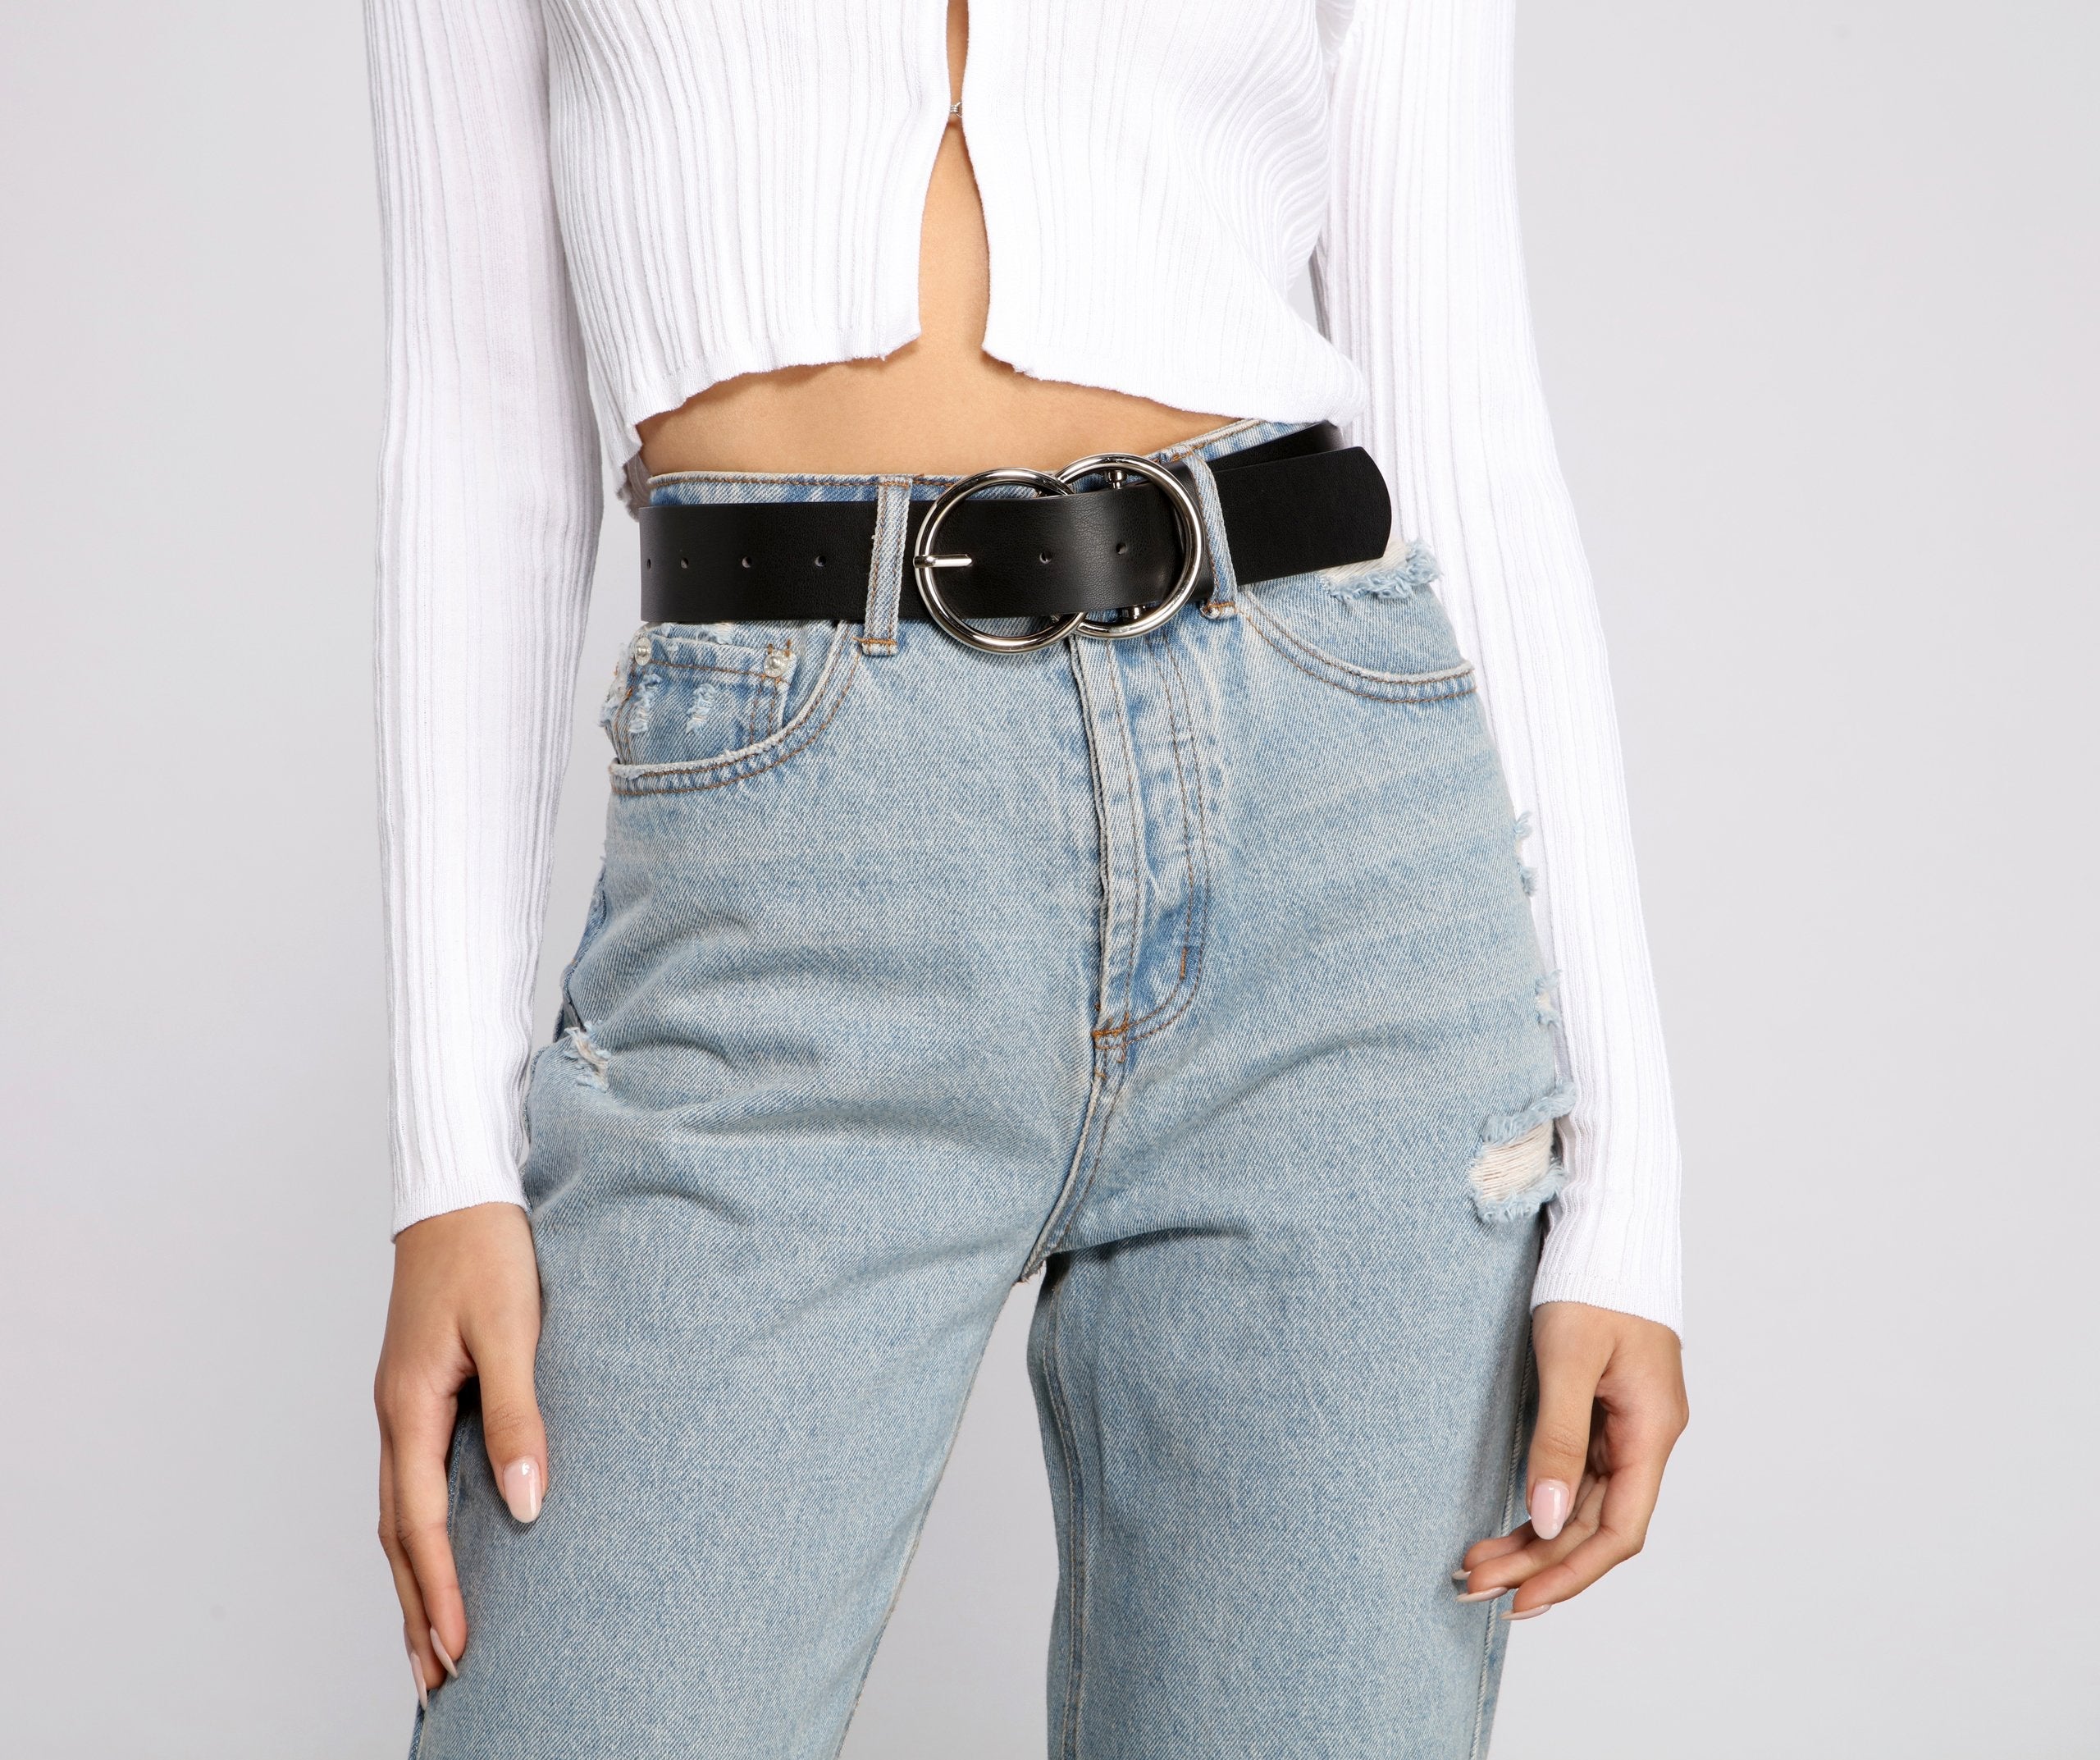 Chic Double O-Ring Buckle Belt